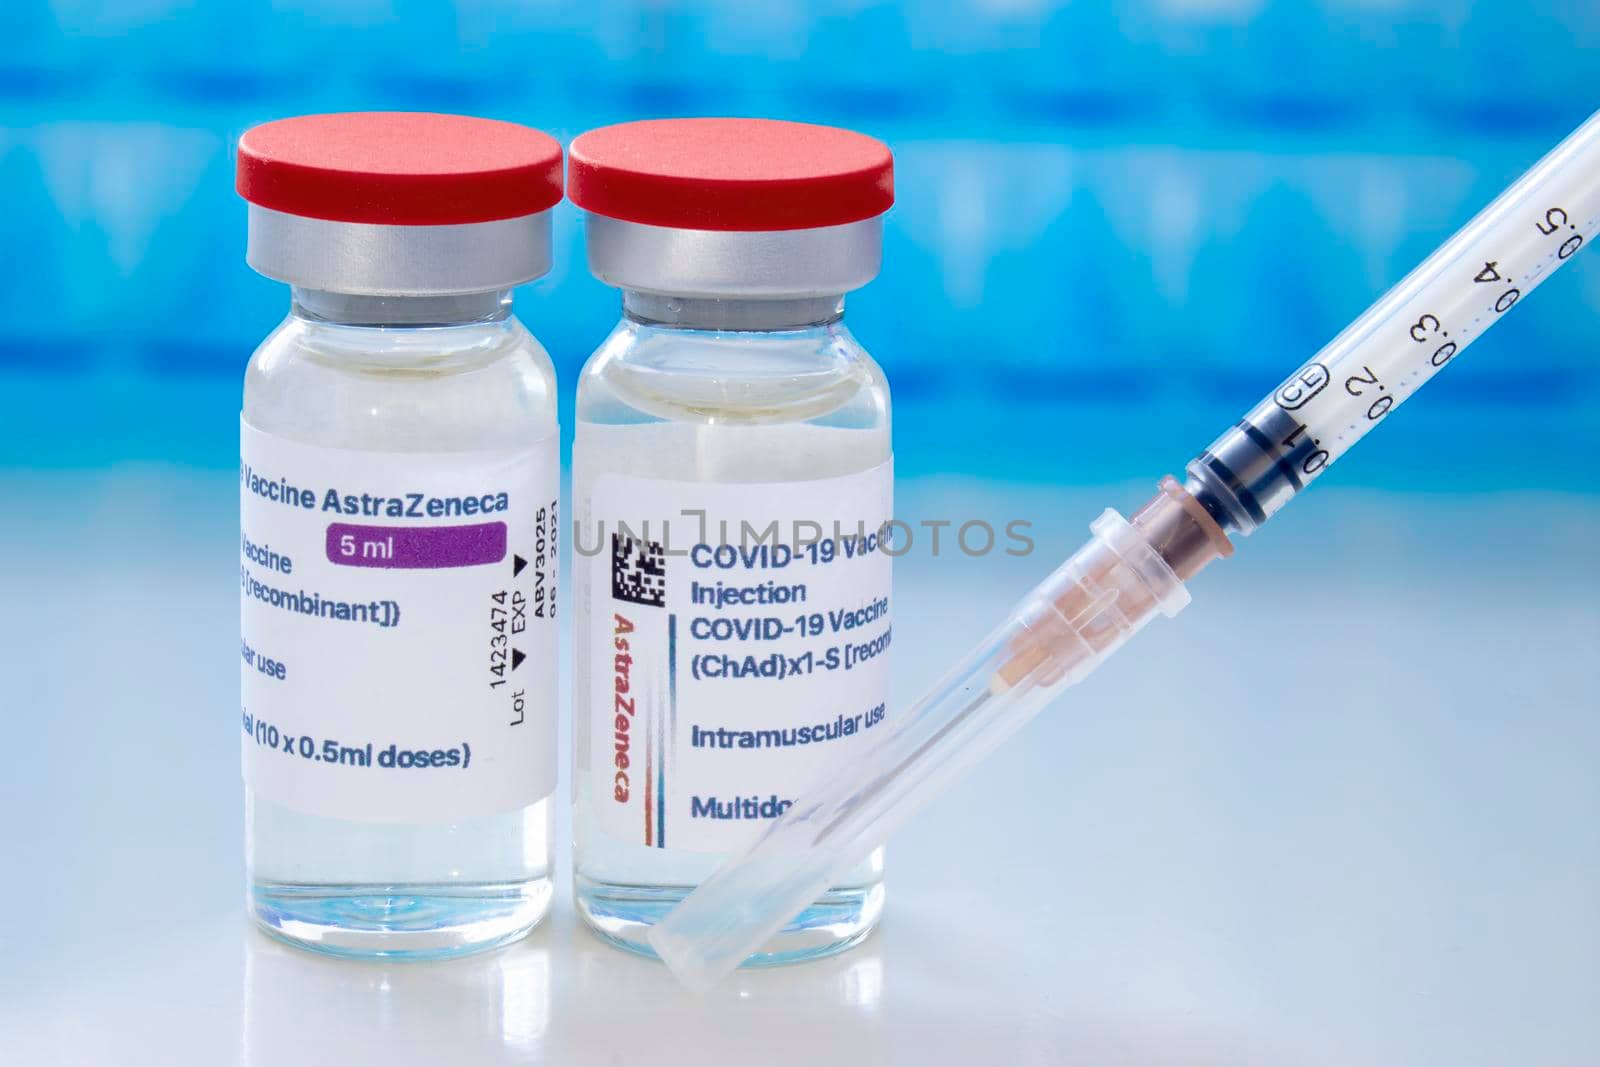 Calgary, Alberta, Canada. April 8, 2021. A couple of AstraZeneca dosis of Covid-19 vaccines on vial bottles and an injection syringe. by oasisamuel